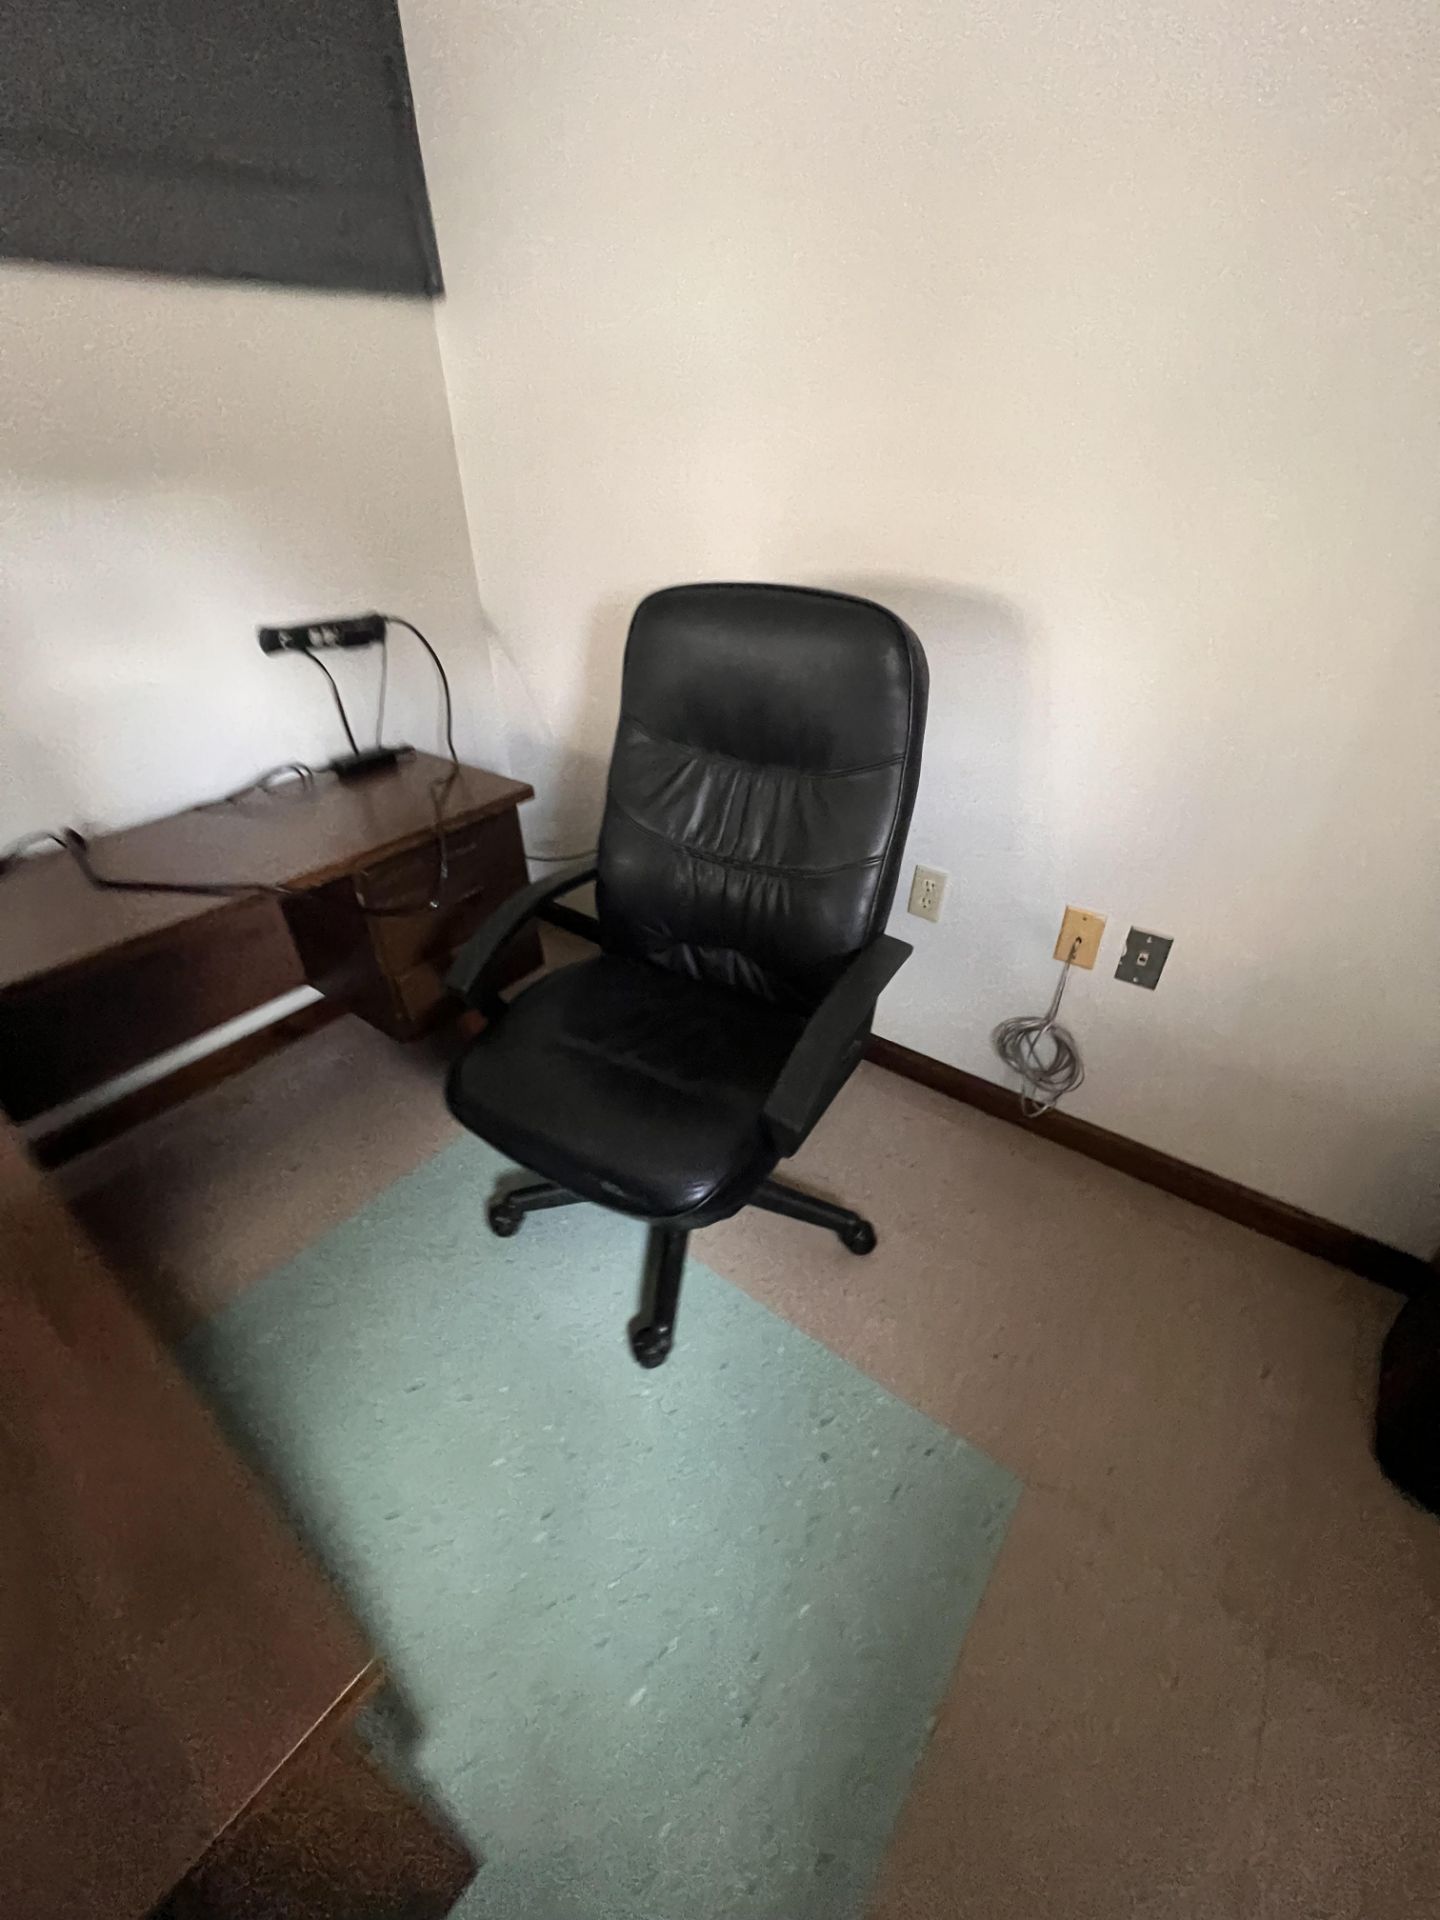 CONTENTS OF OFFICE, INCLUDES DESK, CHAIRS, AND COAT RACK, DOES NOT INCLUDE PHONE - Image 2 of 5